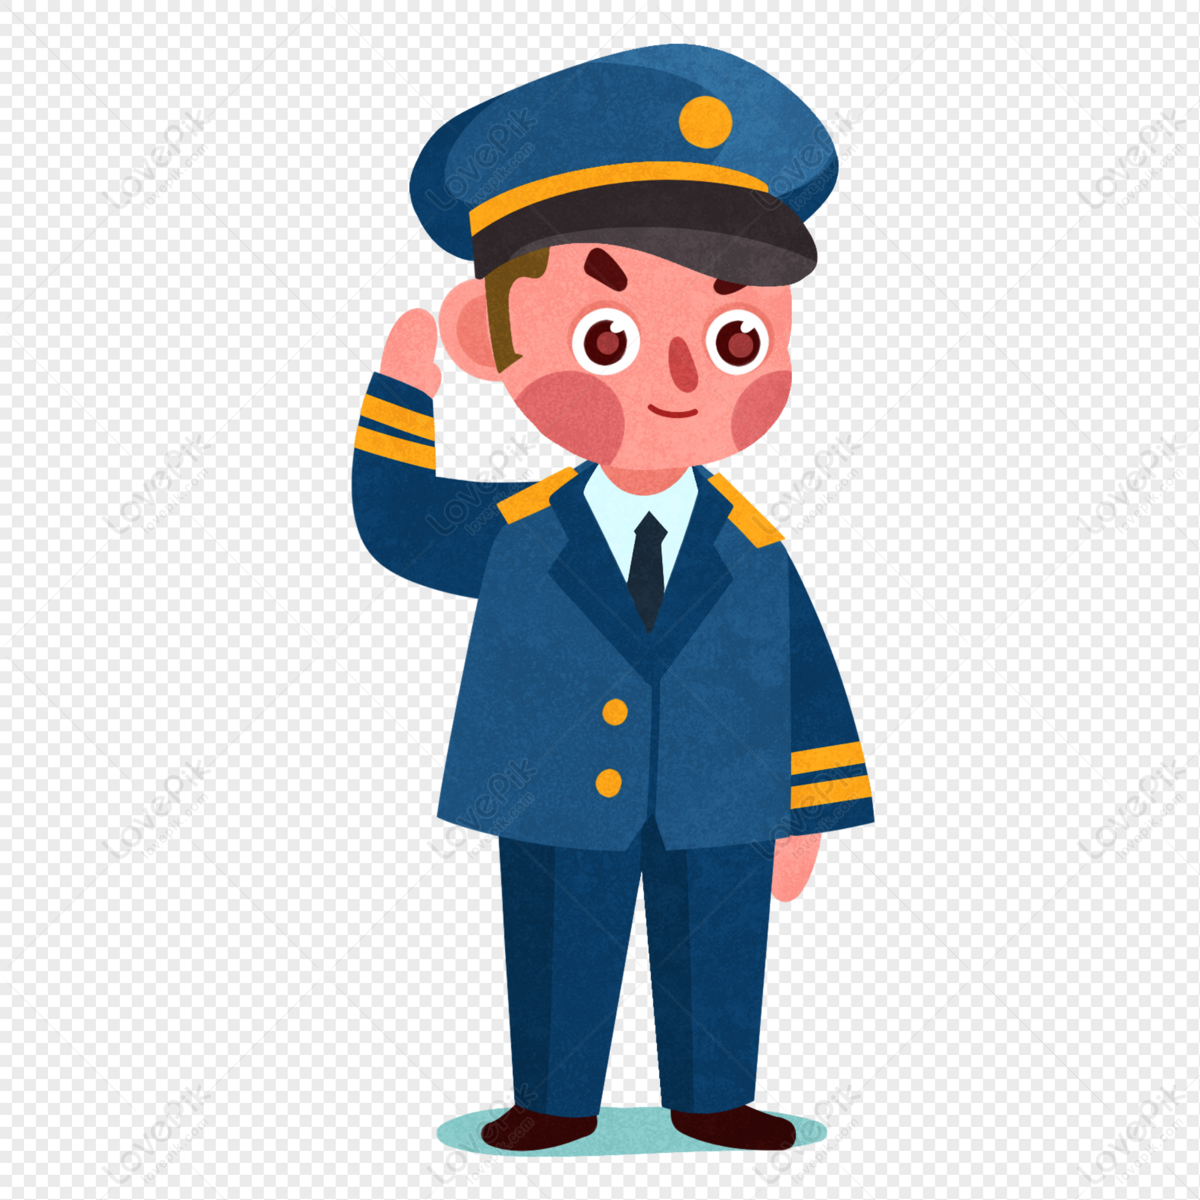 Cartoon Policeman PNG Free Download And Clipart Image For Free Download -  Lovepik | 401330843